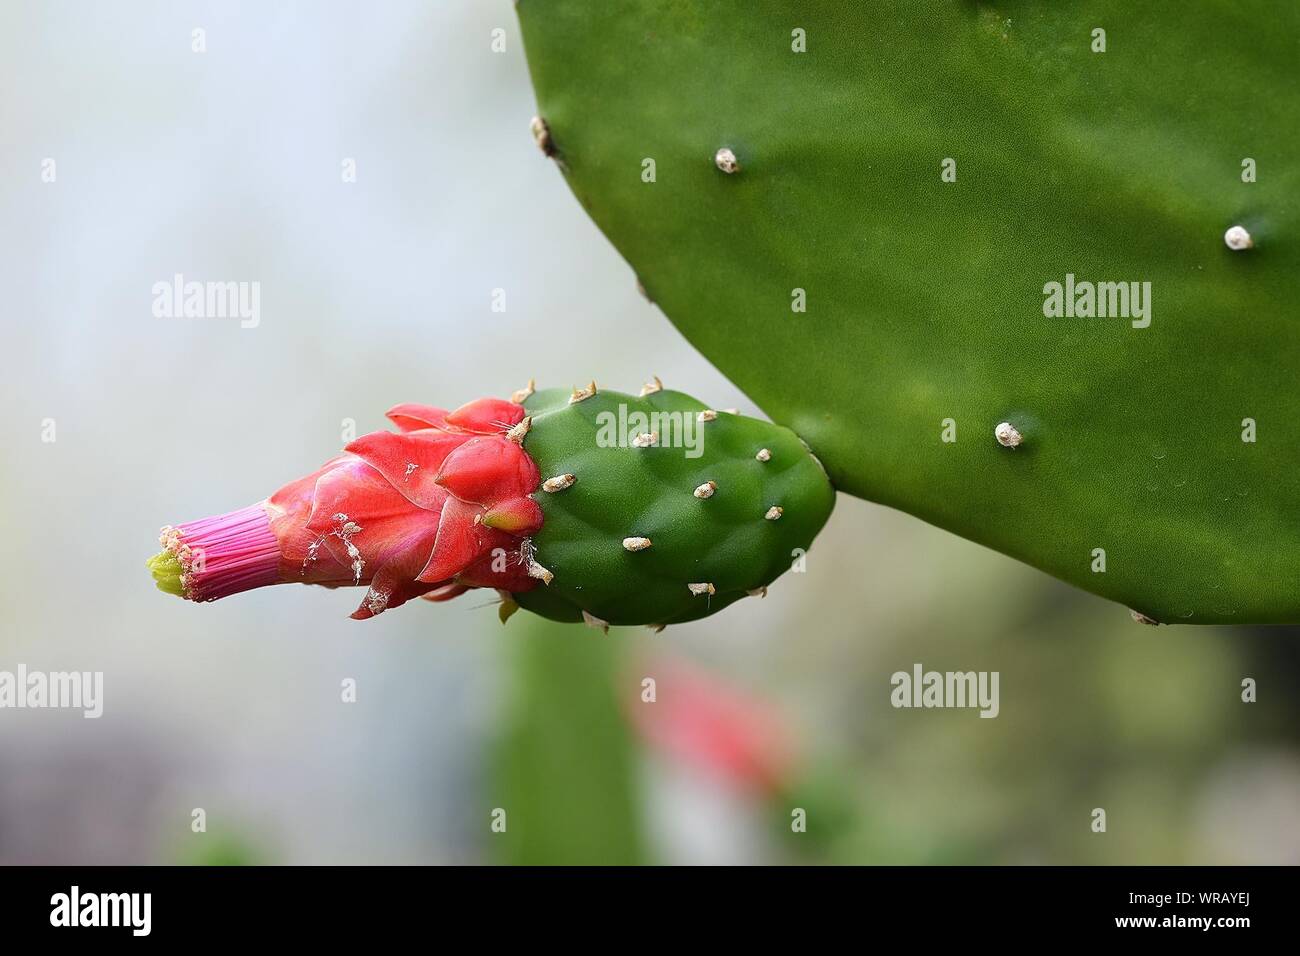 Close-up Of Flower Blooming On Prickly Pear Cactus Stock Photo